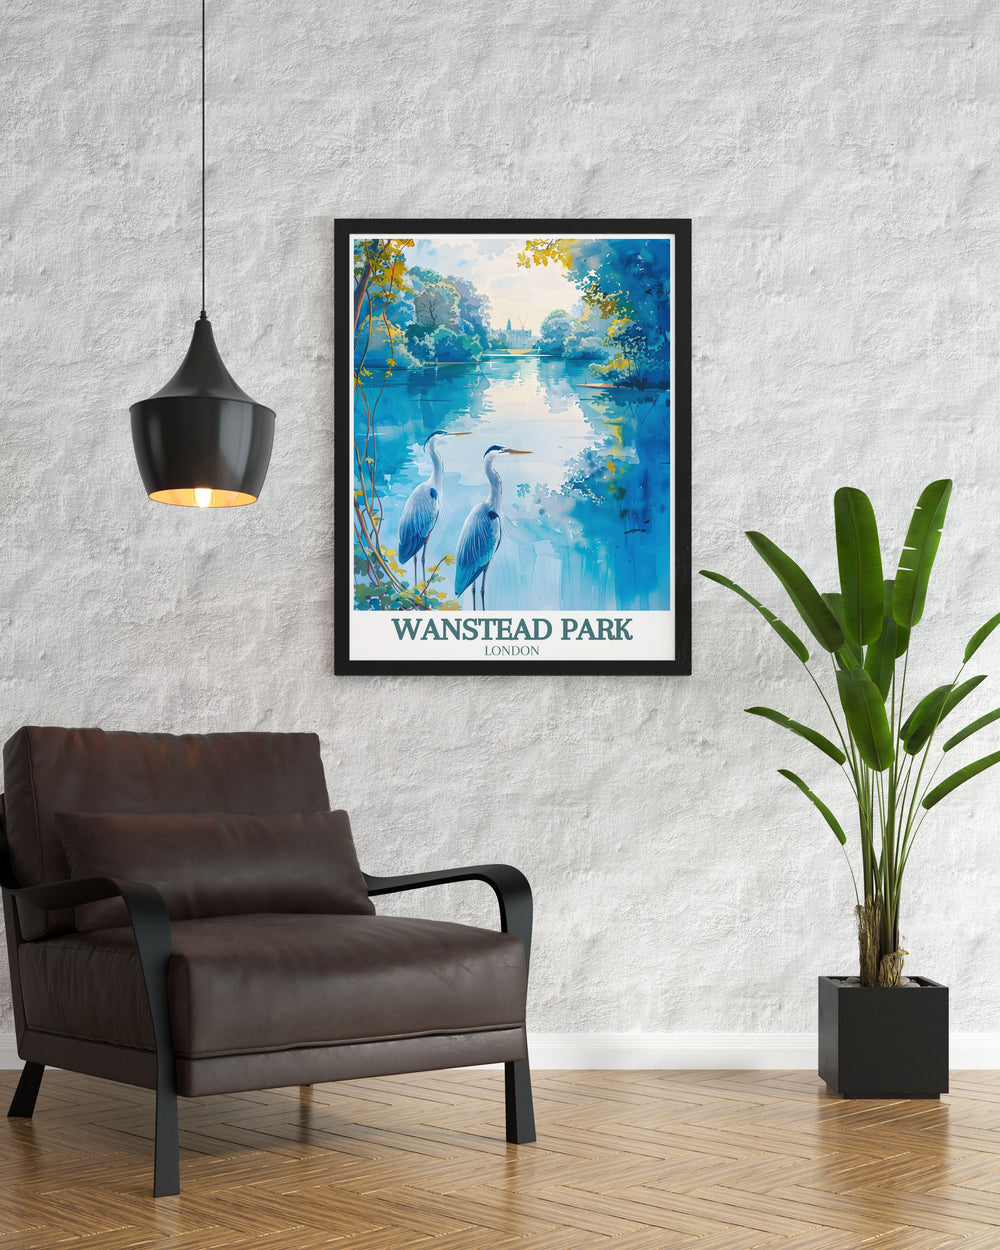 Beautiful Wanstead Park poster featuring vibrant bluebells and tranquil woodlands. Ideal for adding a touch of nature wall art to any room, celebrating the peaceful and picturesque scenes of East Londons hidden gems and beloved parks.